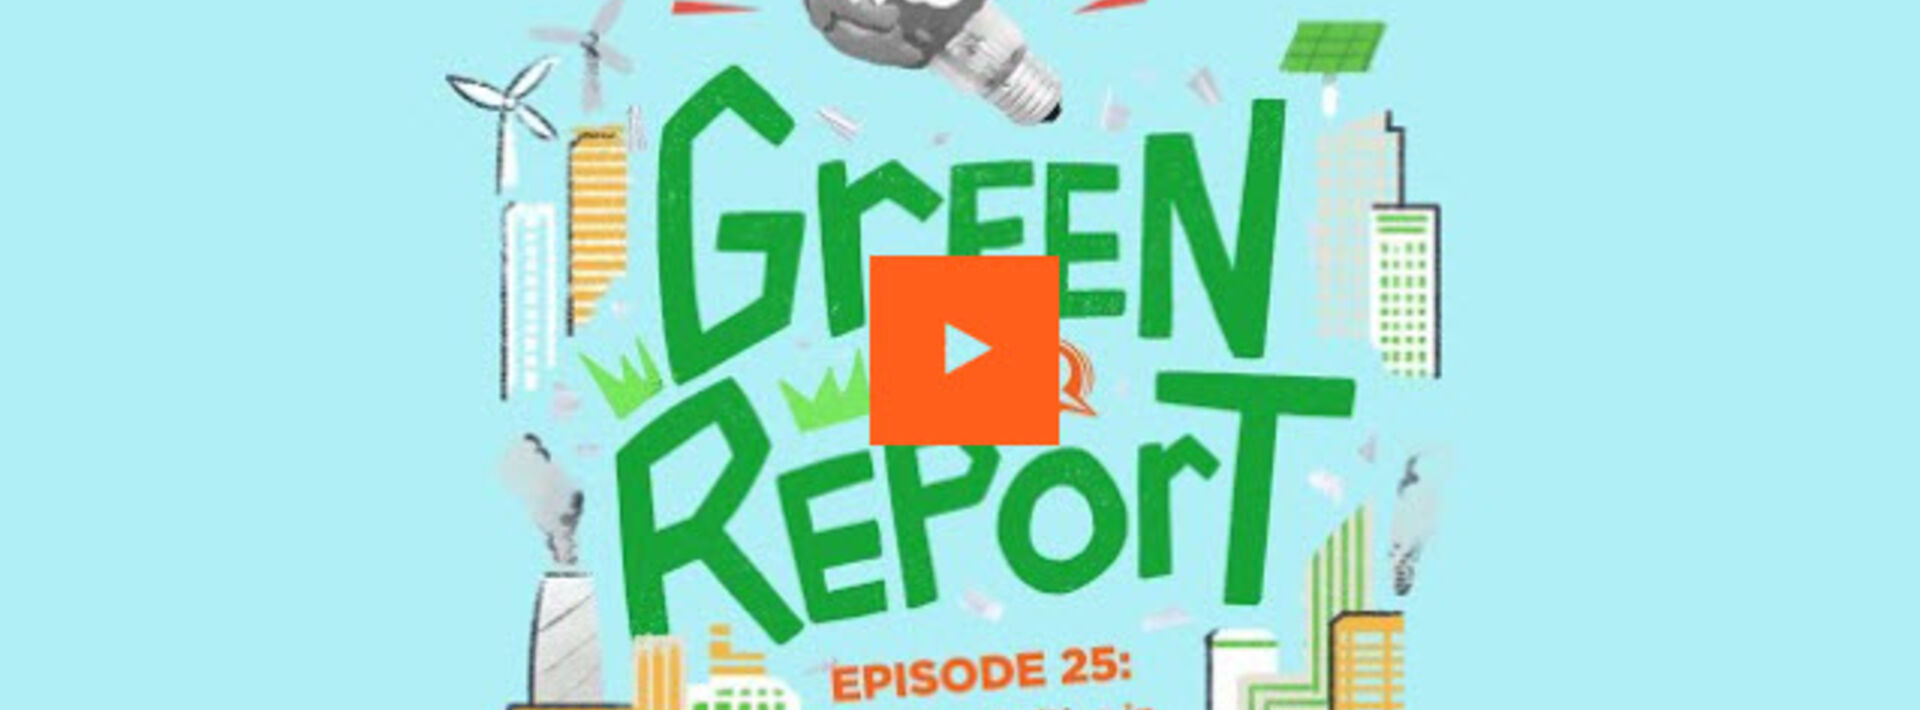 the green report logo